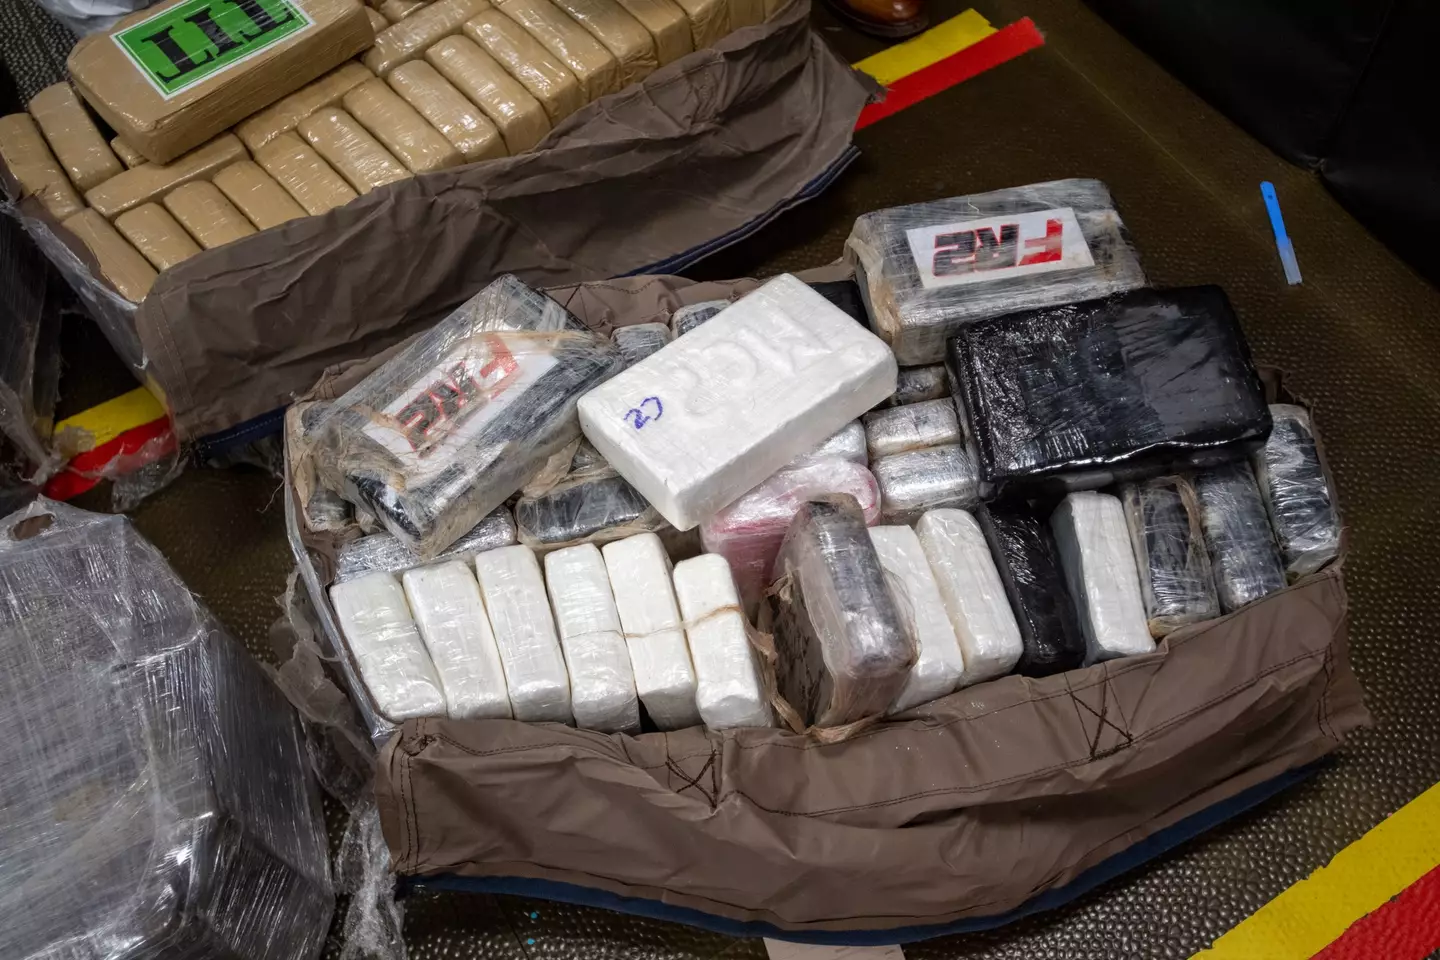 A holdall of cocaine, credit: Northamptonshire Police